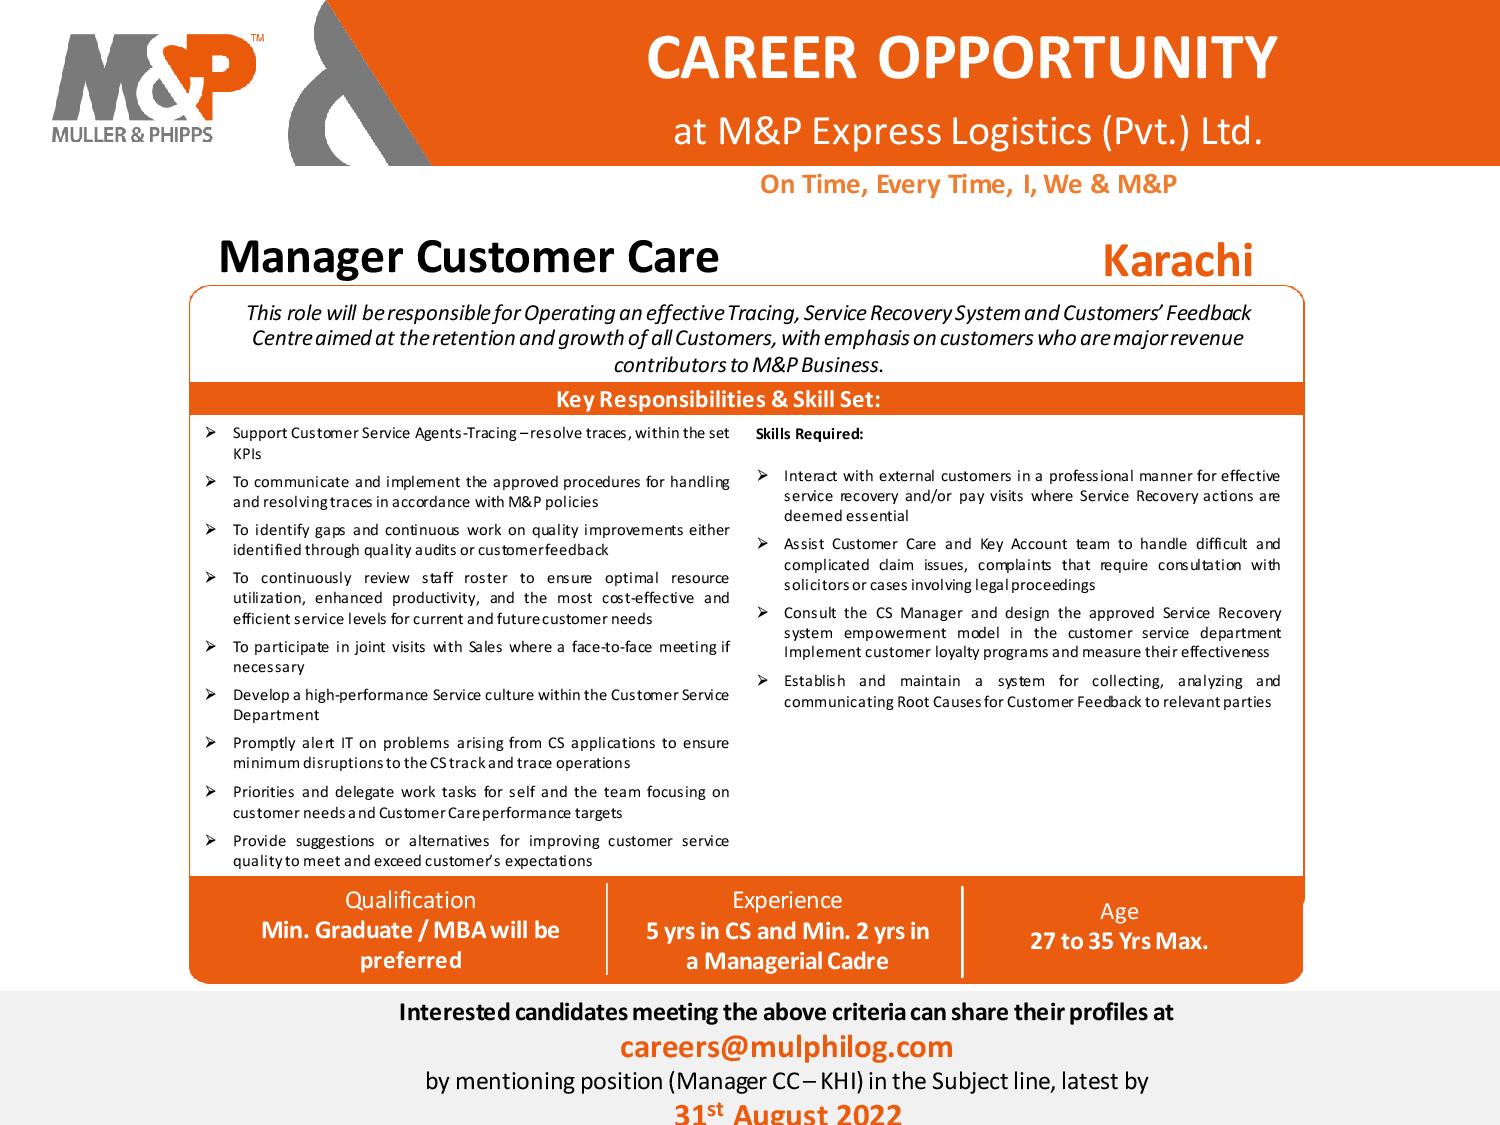 Manager Customer Care opportunity at M&P Express Logistics